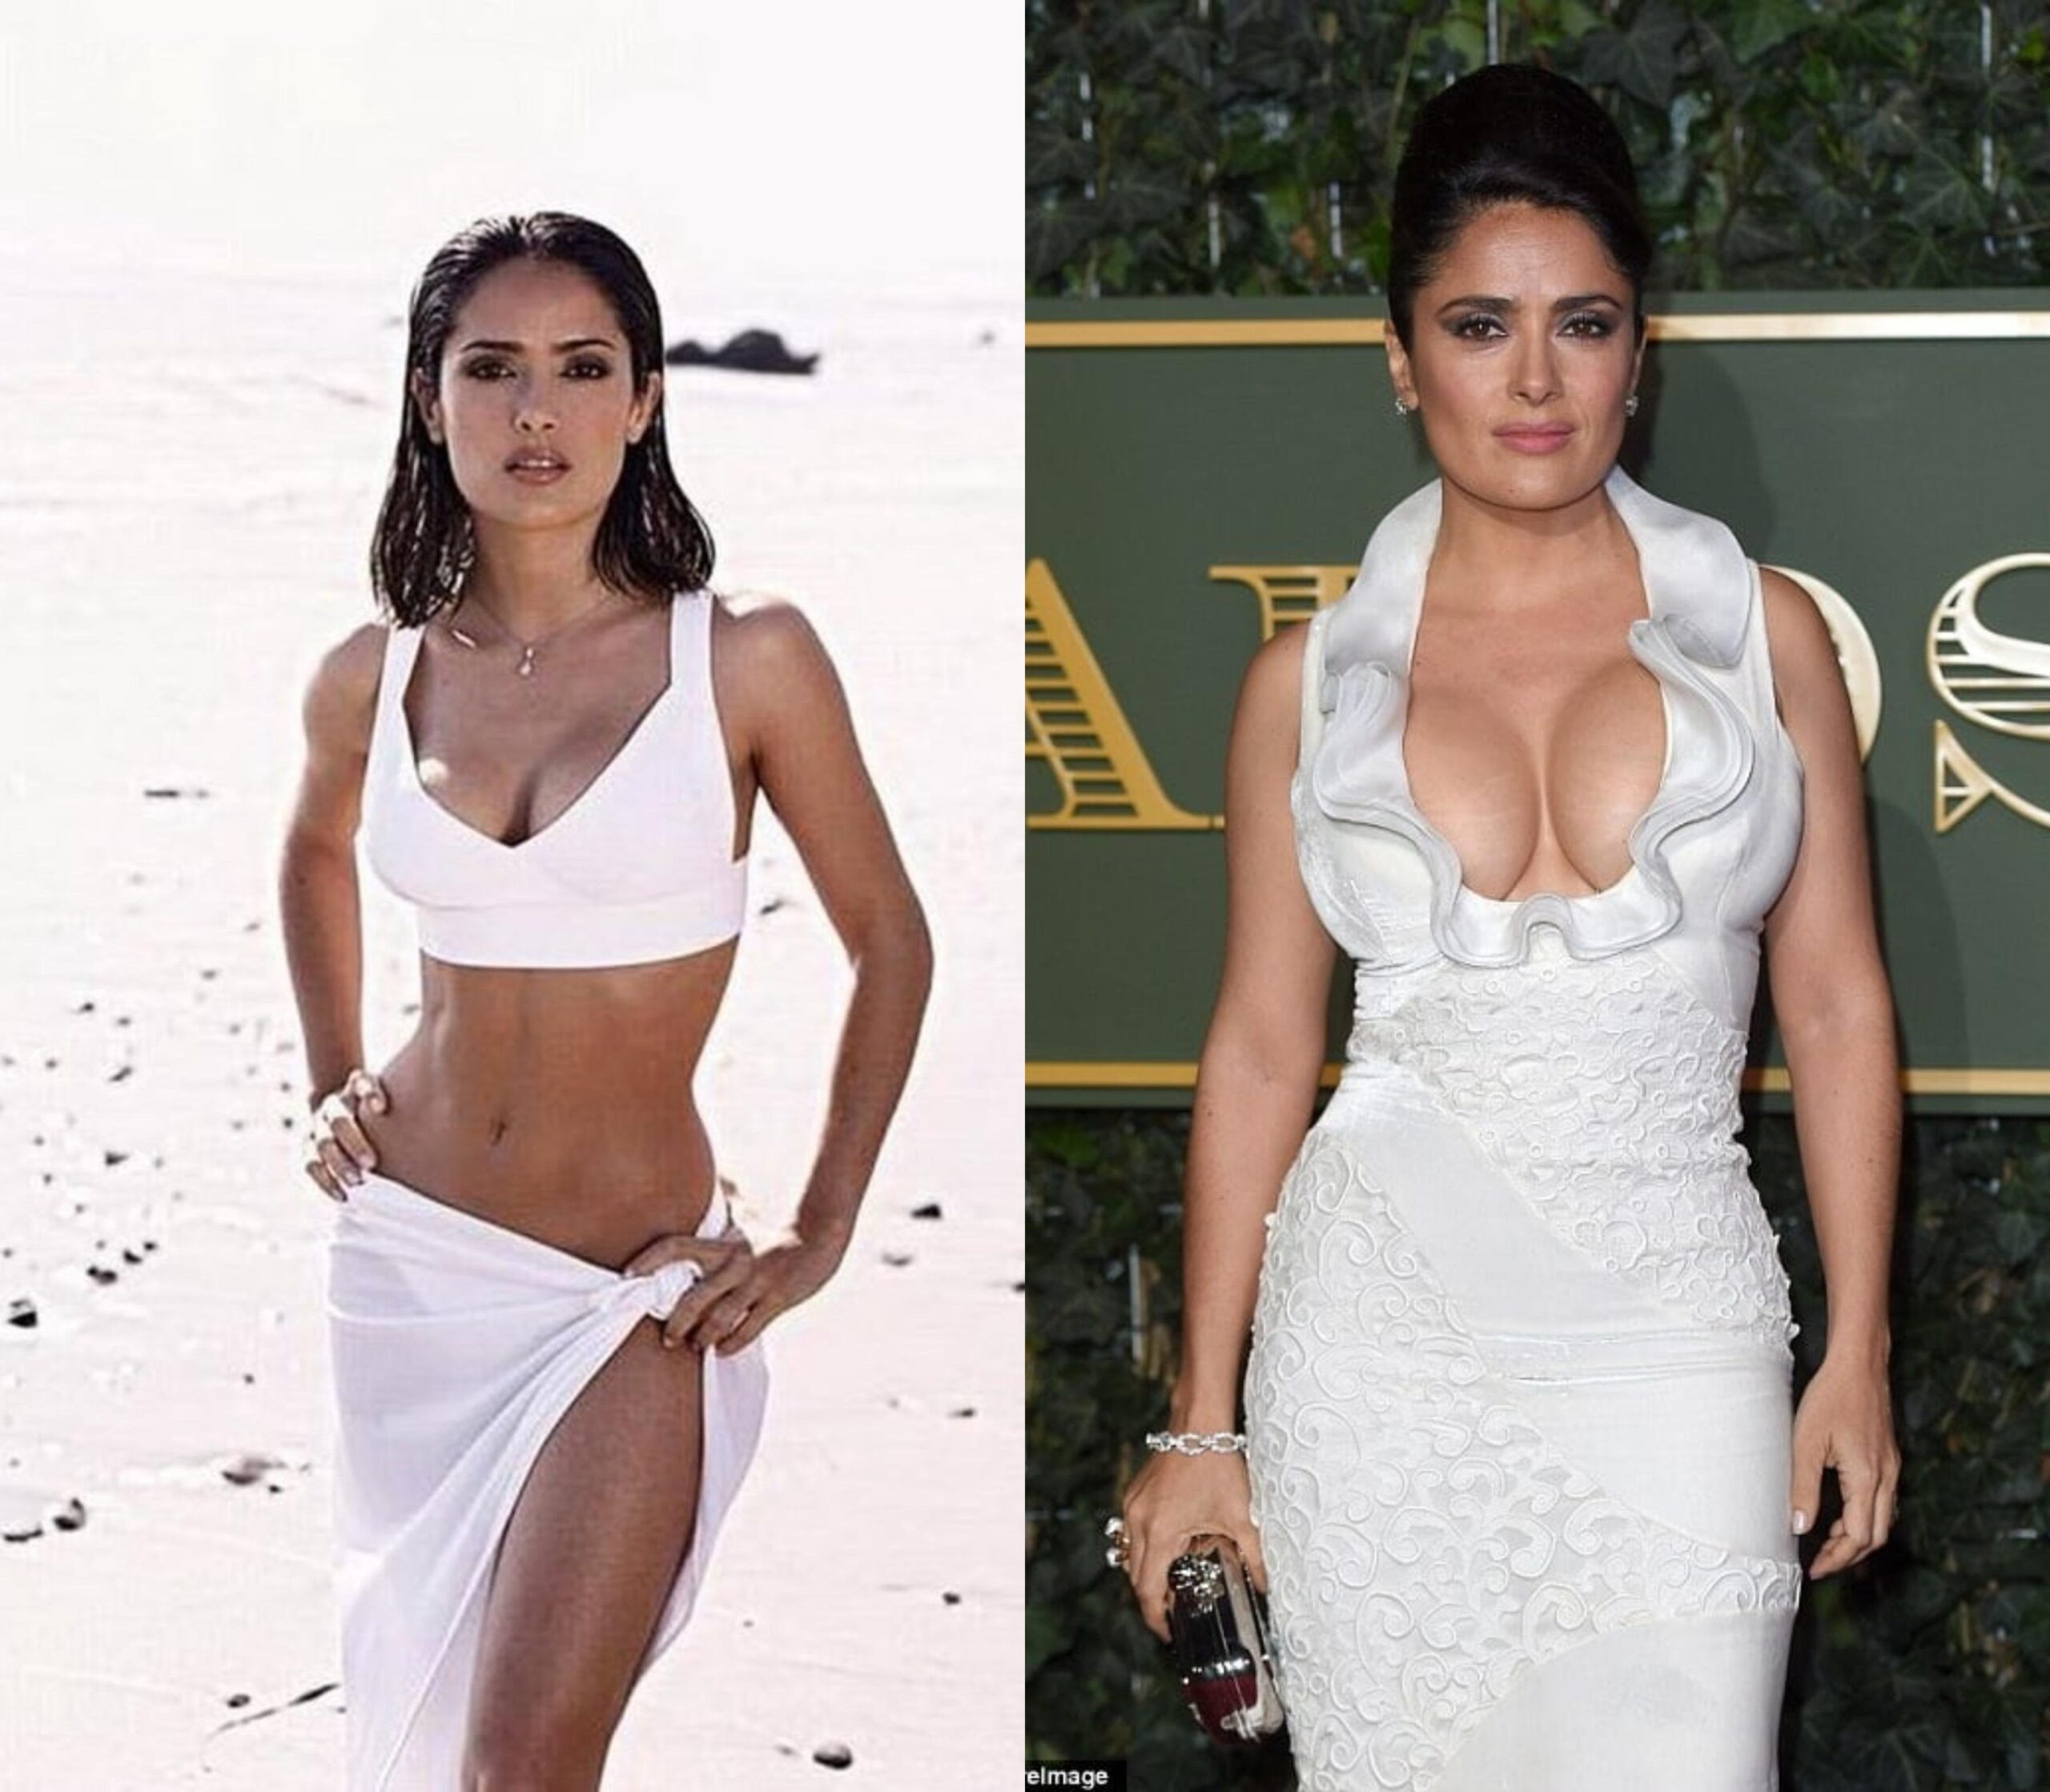 Who would you fuck young Salma Hayek or mommy Salma